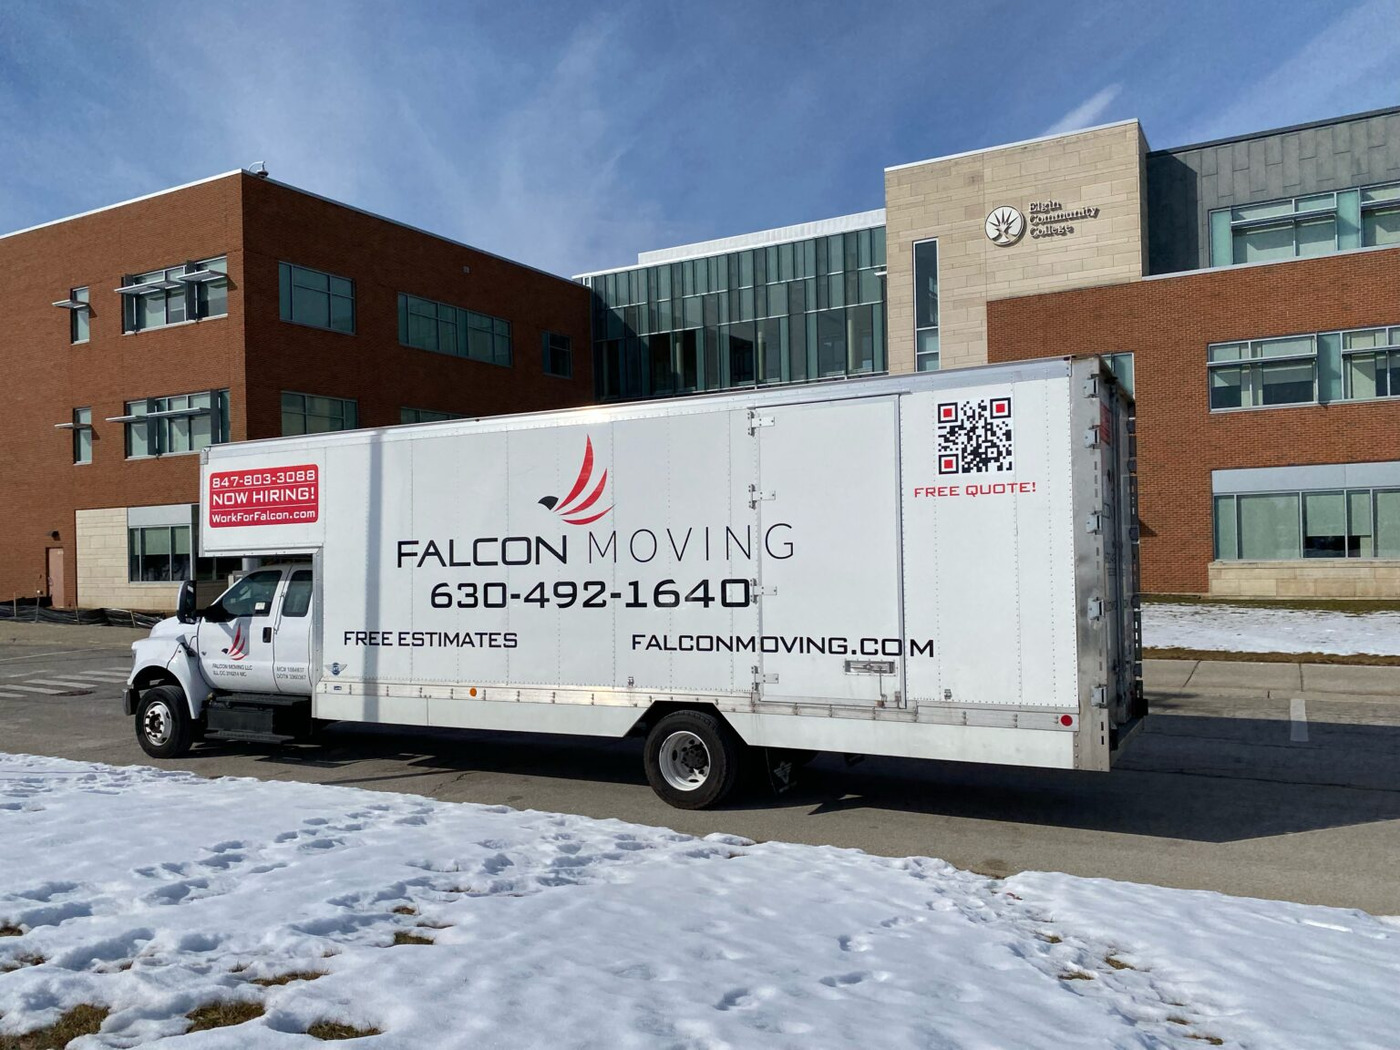 Falcon Moving, LLC is a full-service moving company based in Elgin, Illinois, offering a wide range of moving services for residential and commercial clients.